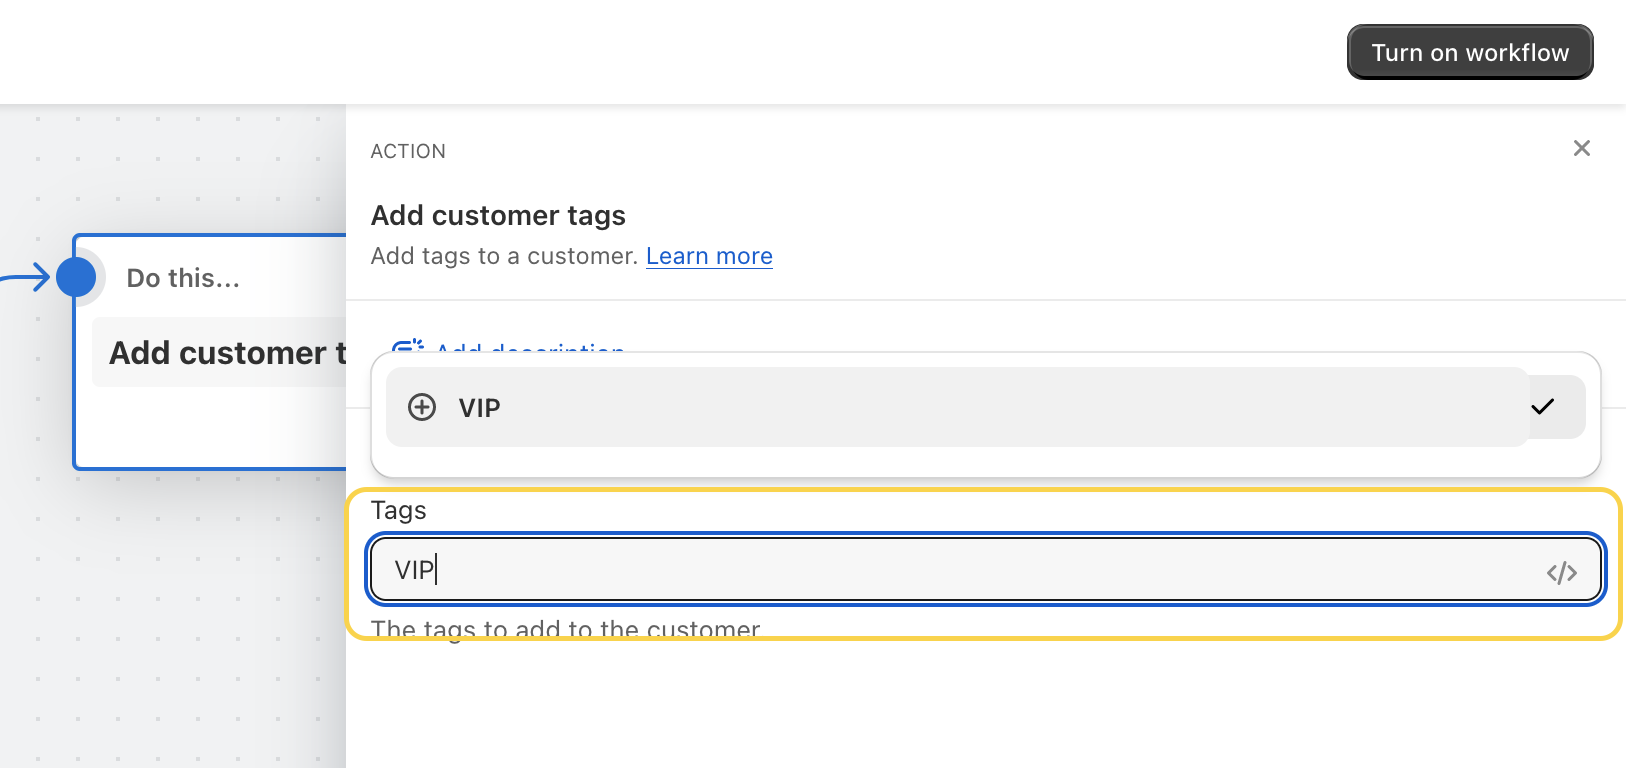 Adding a customer tag "VIP" in Shopify flow app